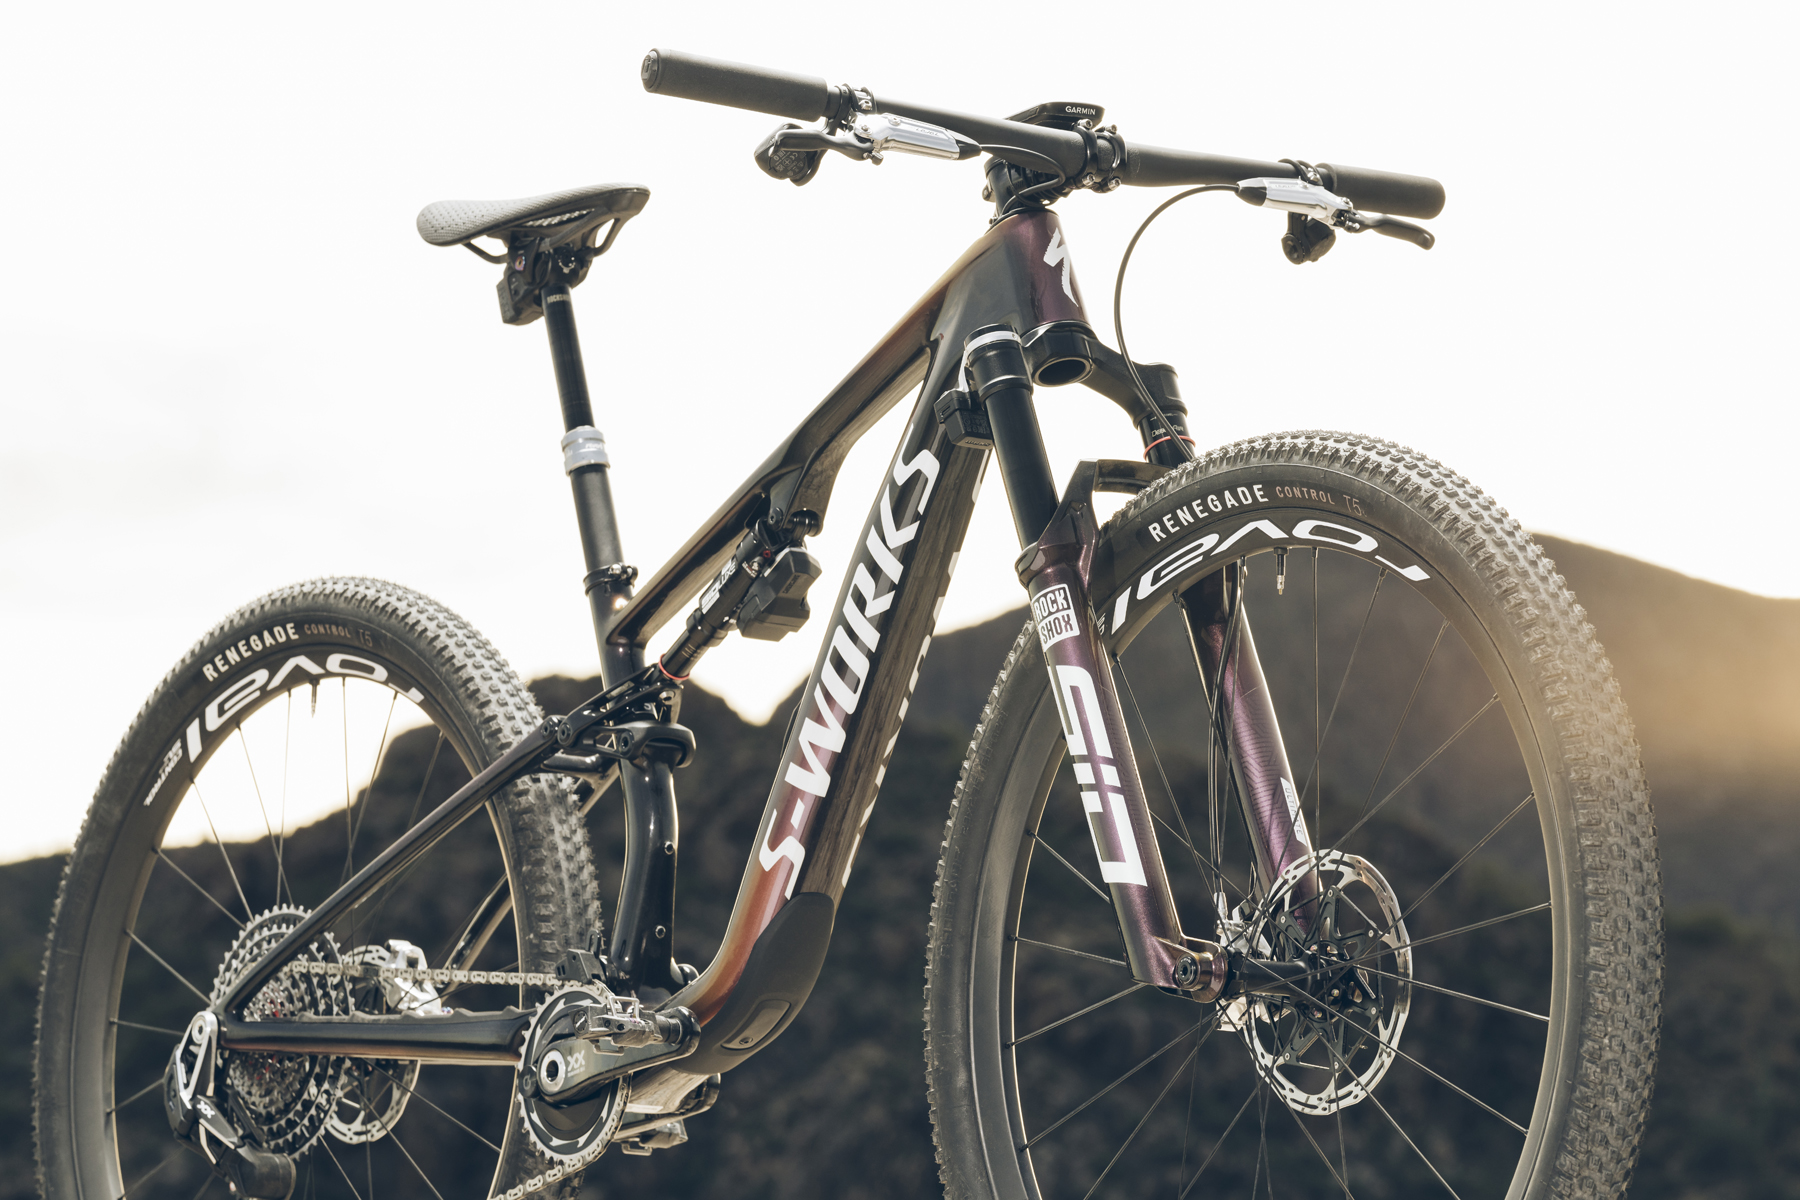 David Golay reviews the RockShox SID and SIDLuxe Flight Attendant for Blister